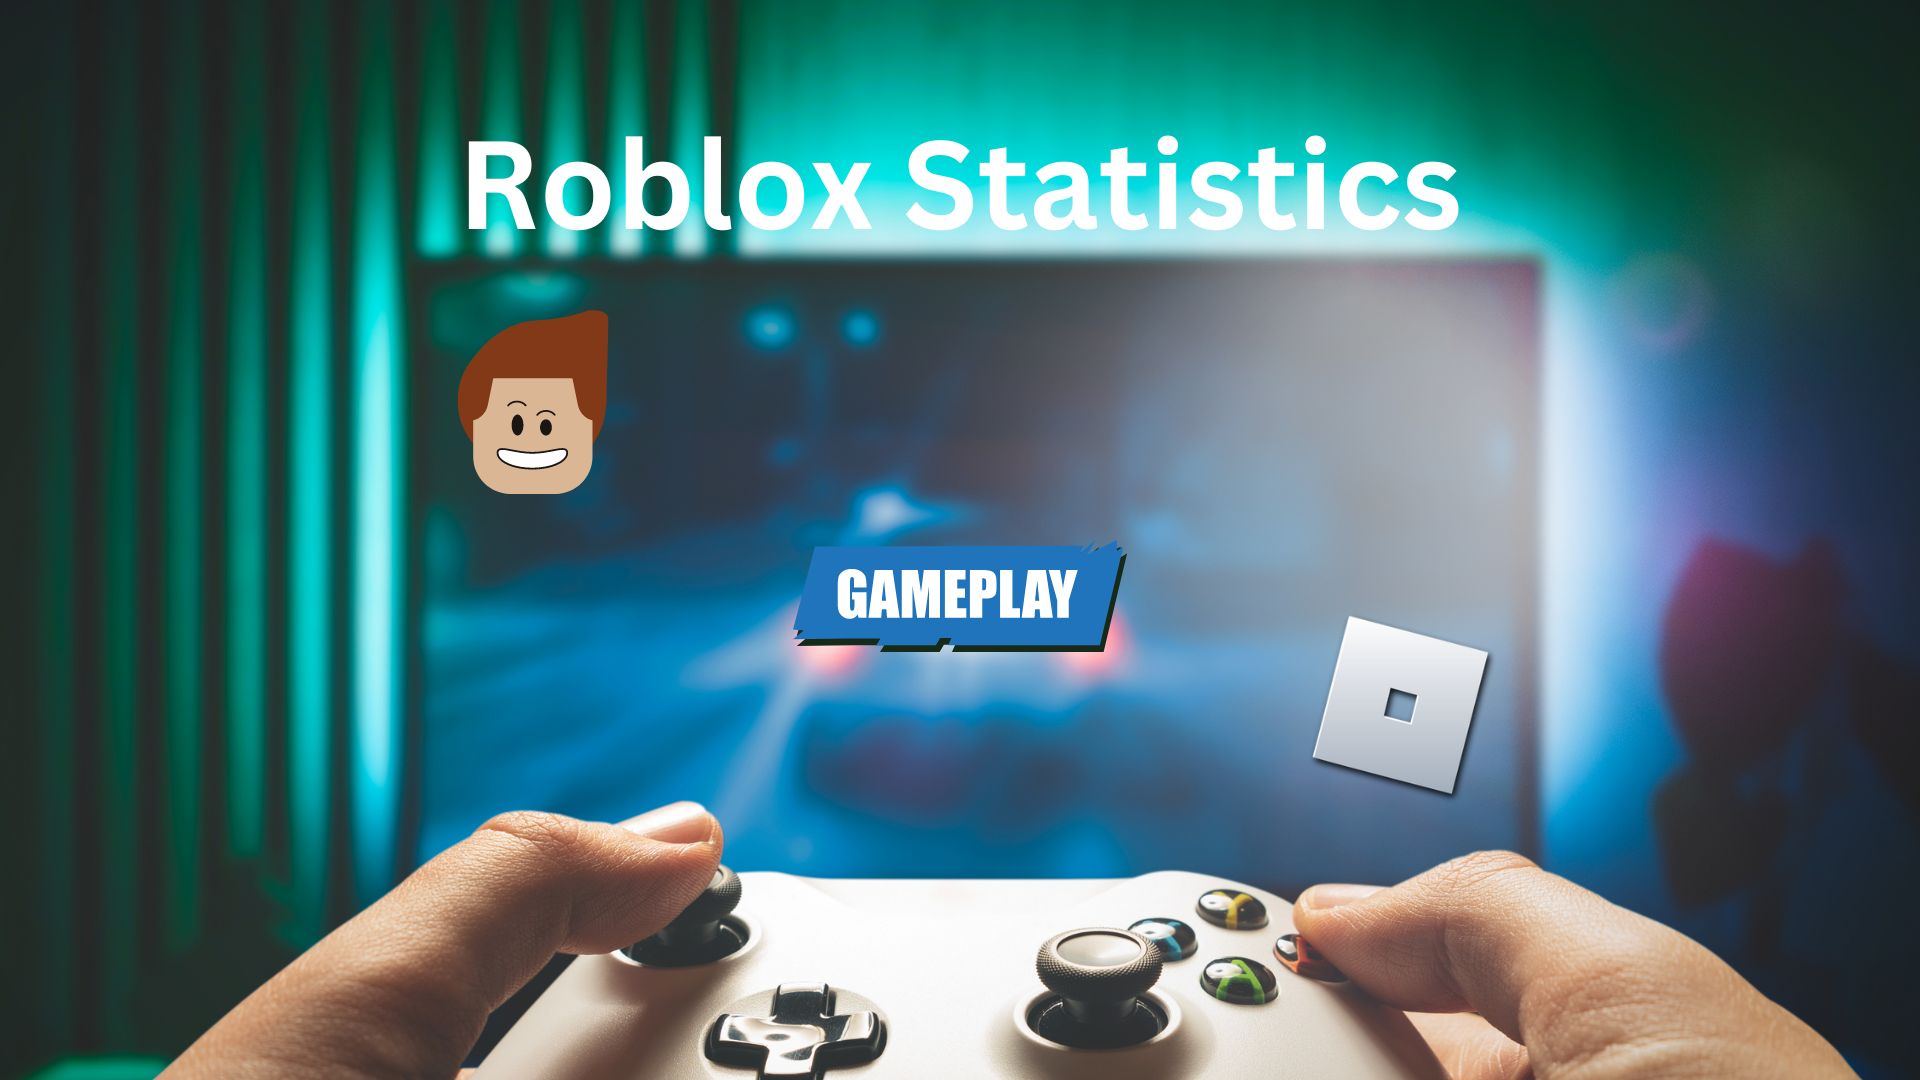 Roblox Statistics About Revenue, Players, and Developers